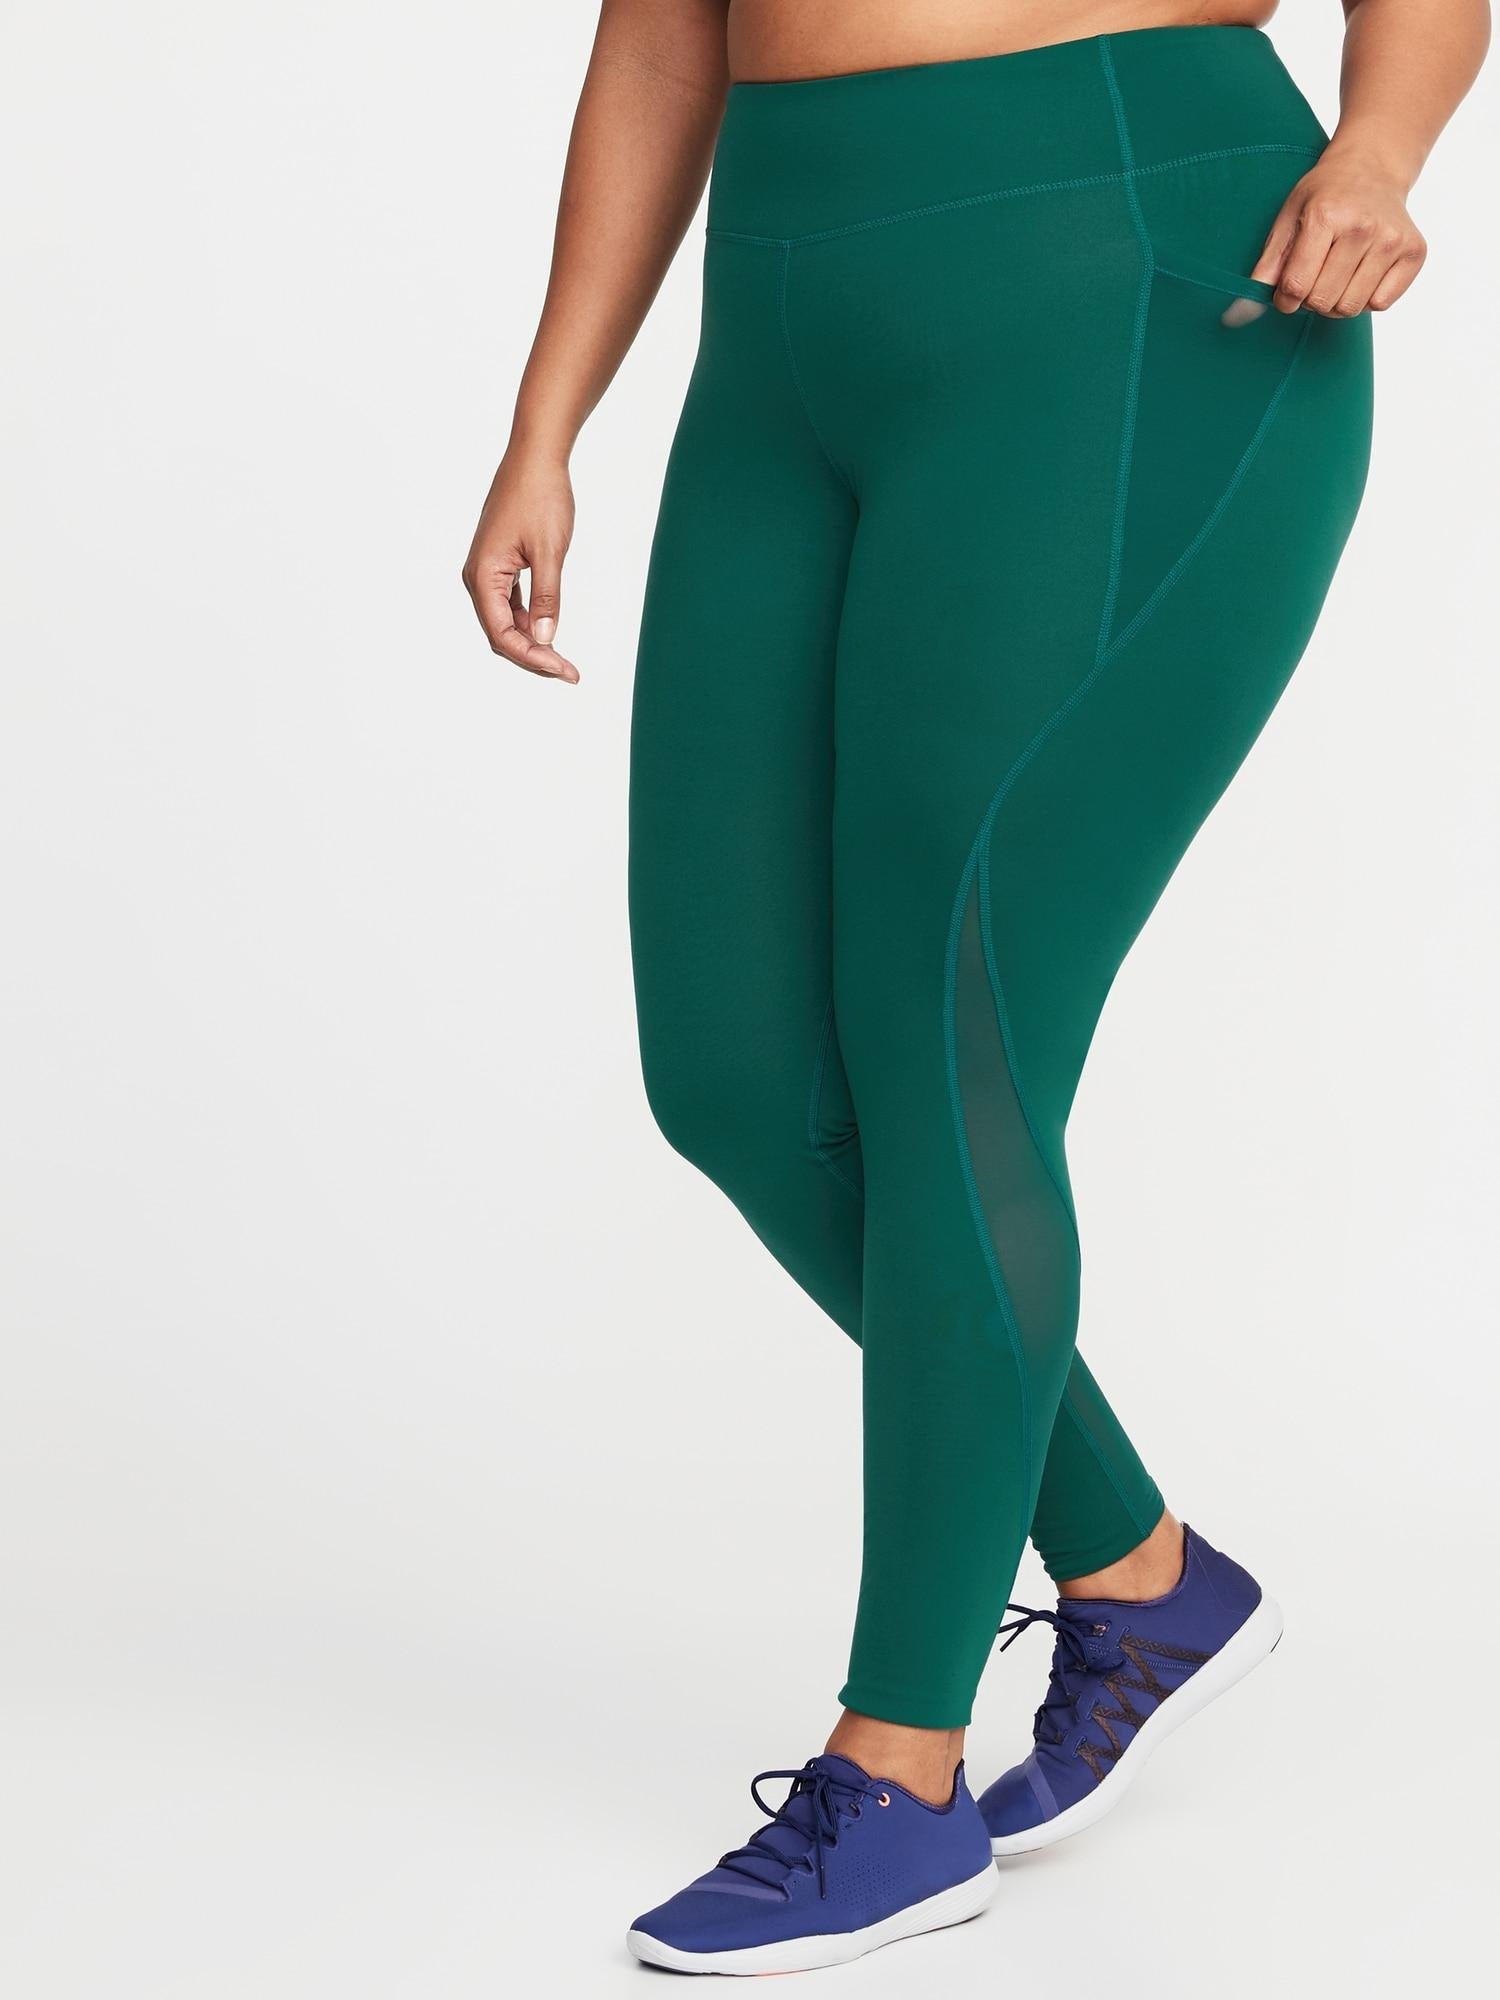 Old Navy Leggings For Plus Size Women  International Society of Precision  Agriculture